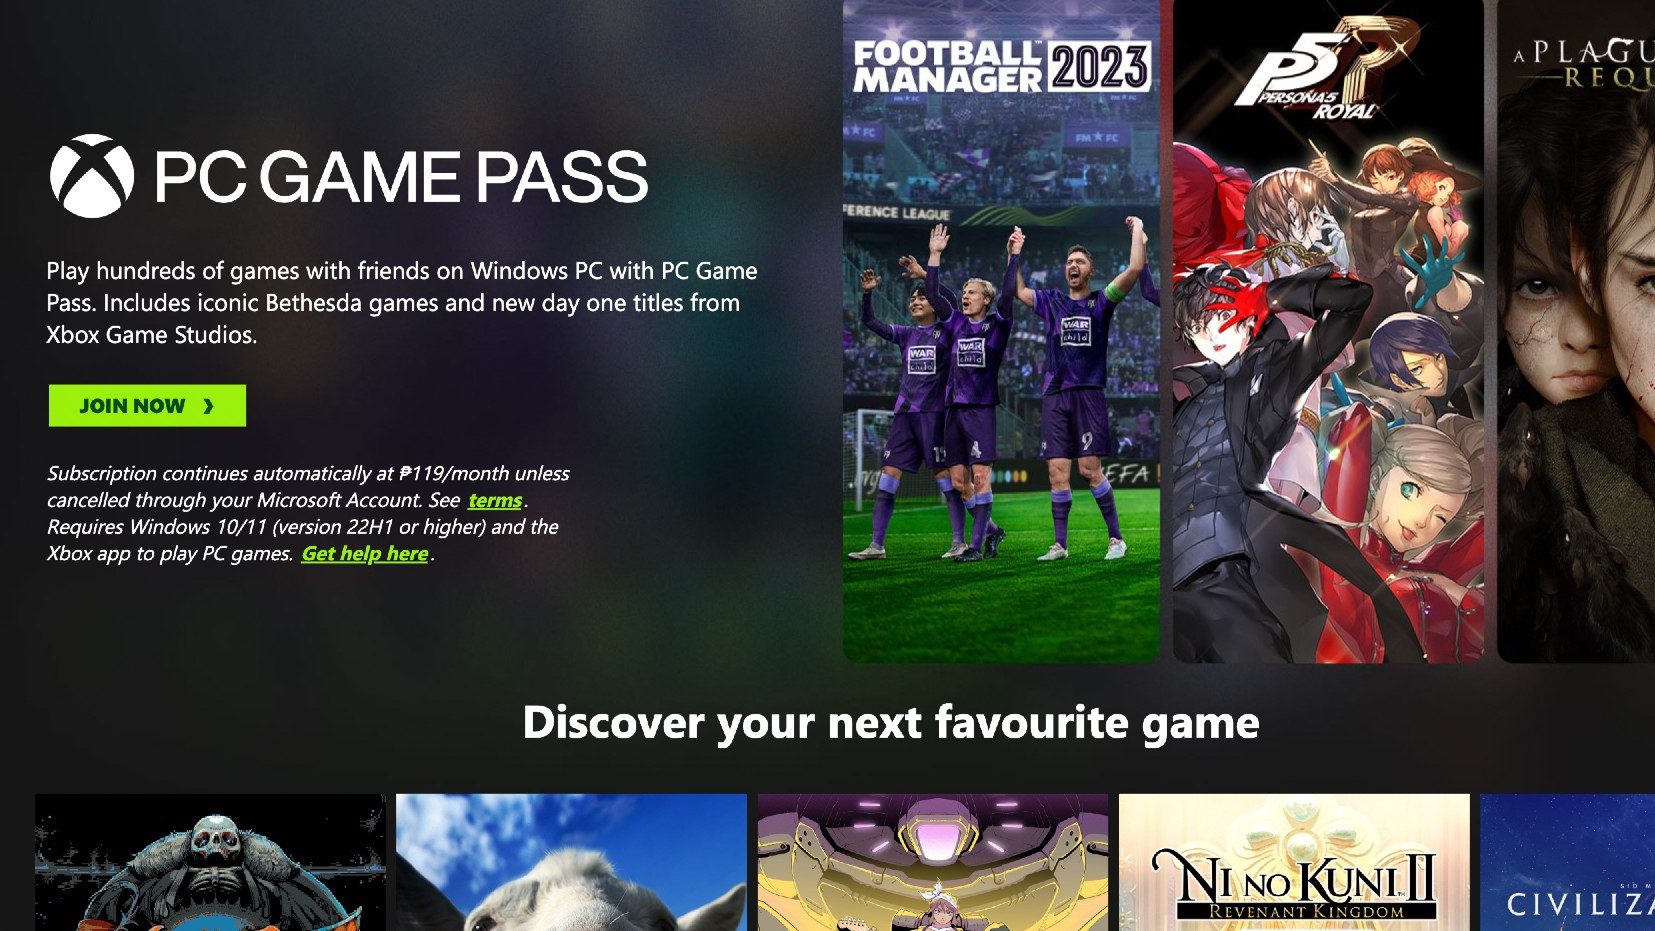 Microsoft's PC Game Pass finally comes to Malaysia, now available